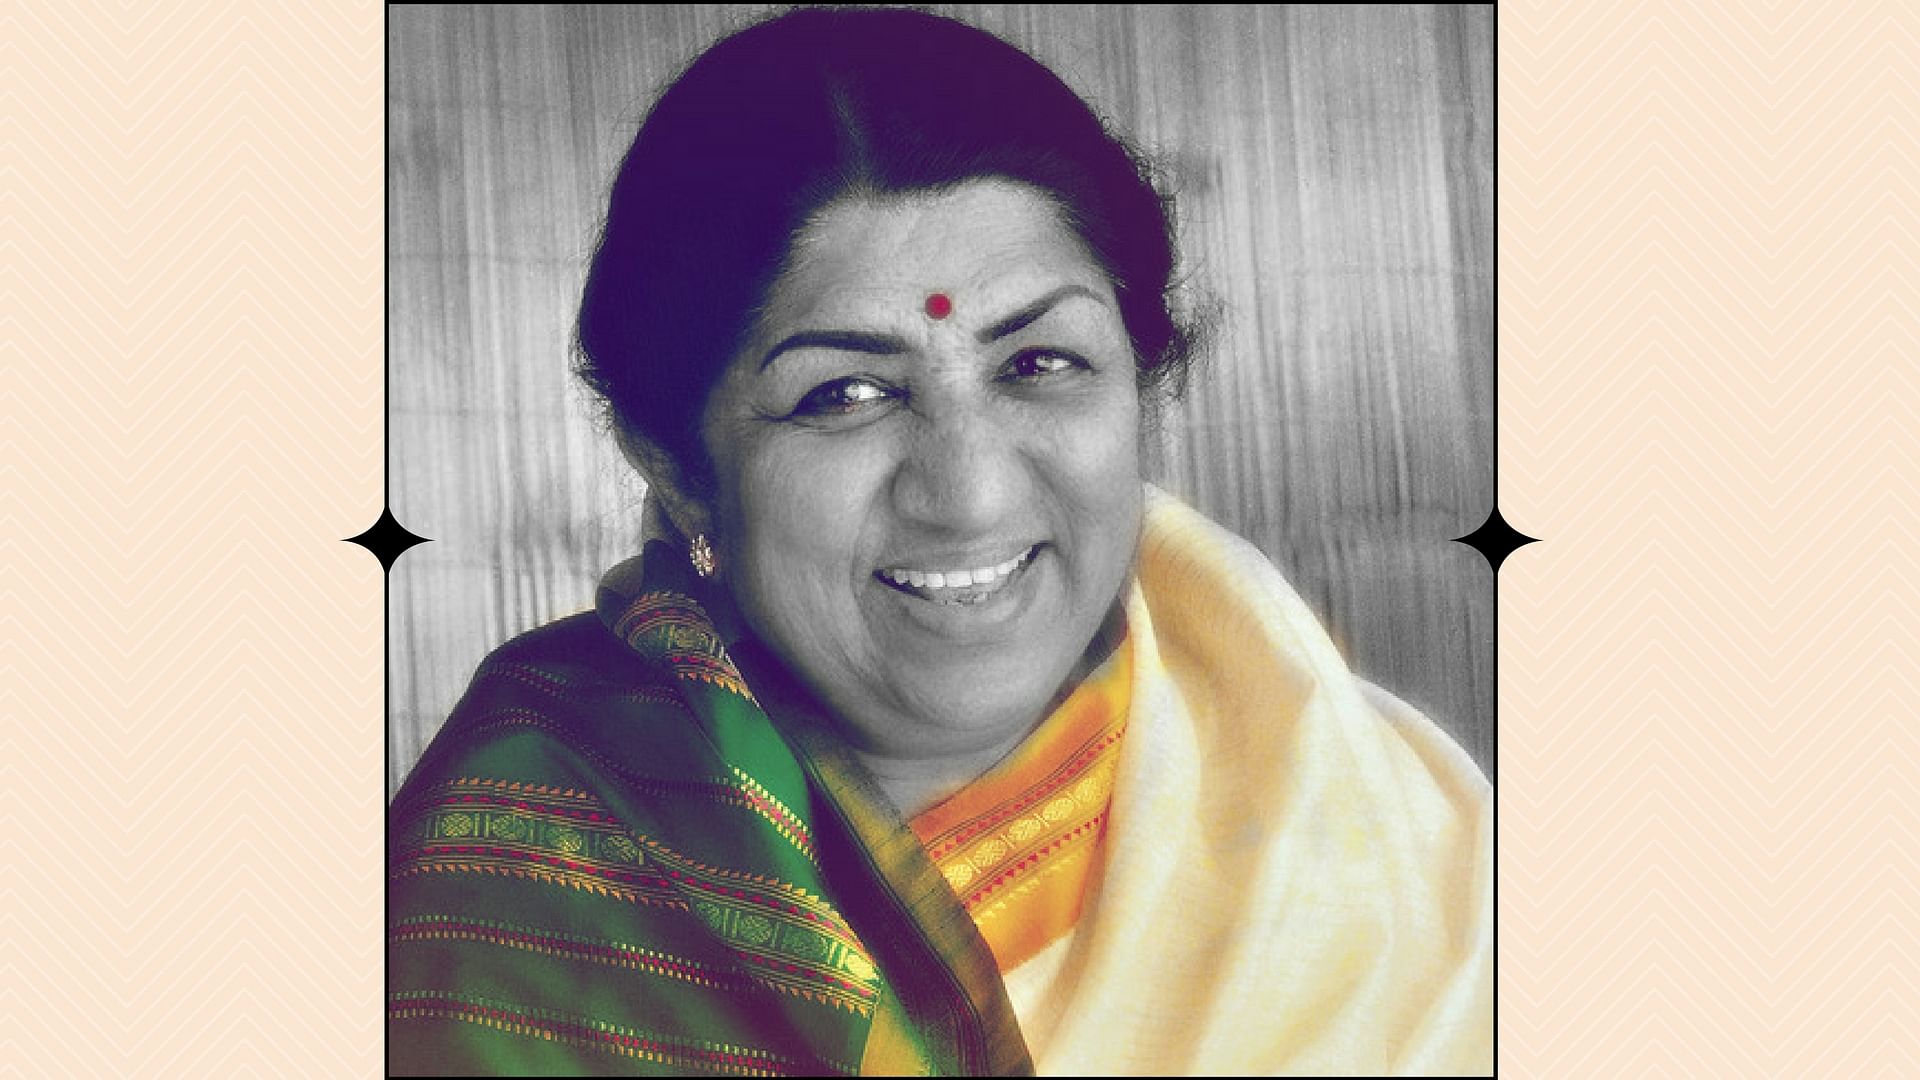 Lata Mangeshkar shares the highs and lows of her life as India’s nightingale. (Photo courtesy: Twitter/<a href="https://twitter.com/talqueenx">@<b>talqueenx</b></a>; altered by The Quint)